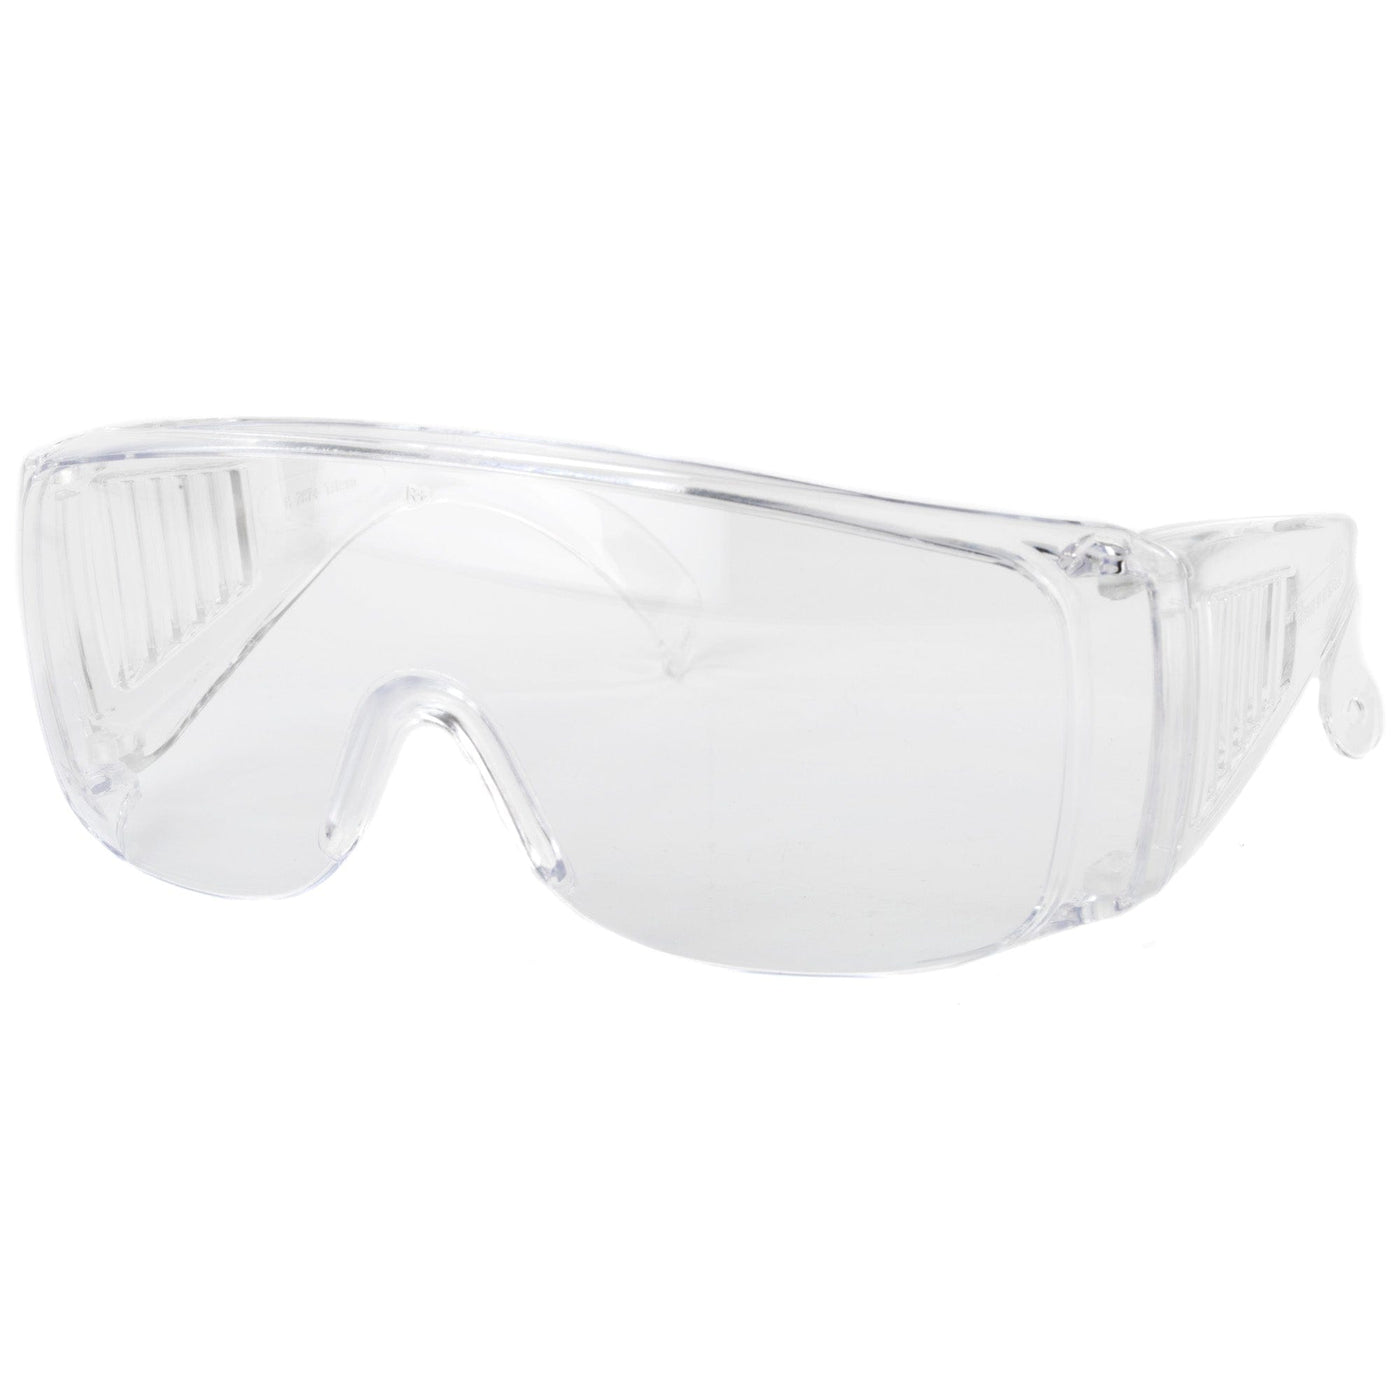 Radians Radians Coveralls Clear Glasses Cvrs Safety/Protection